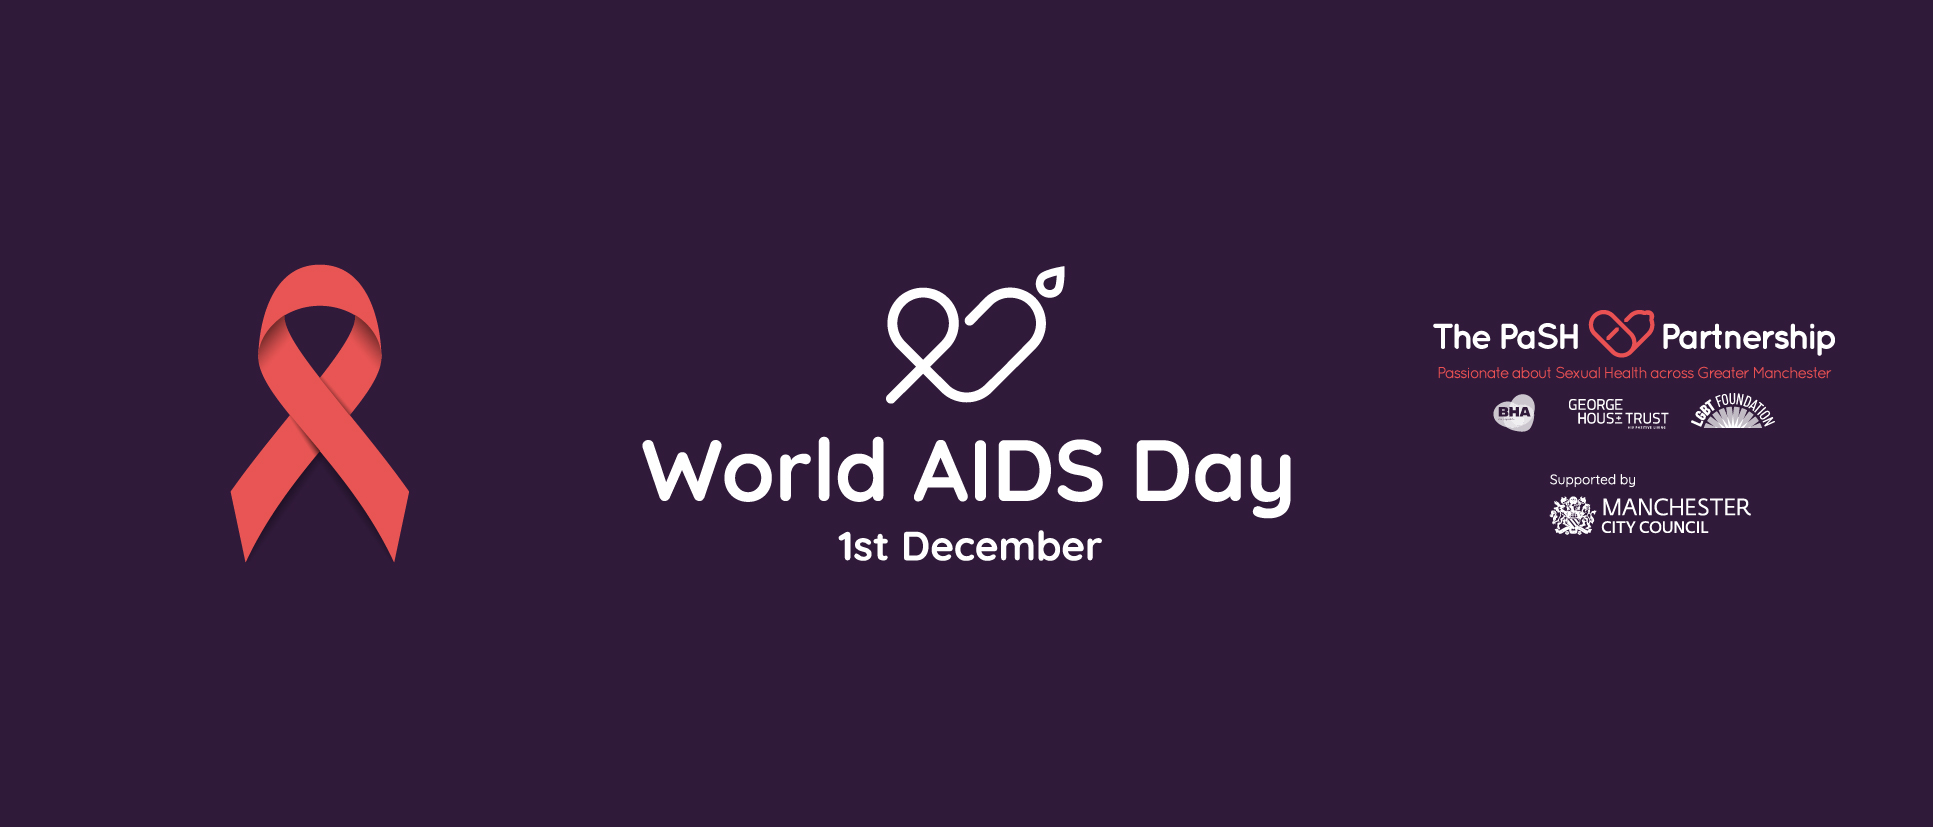 World AIDS Day Ribbon and logo along with PaSH